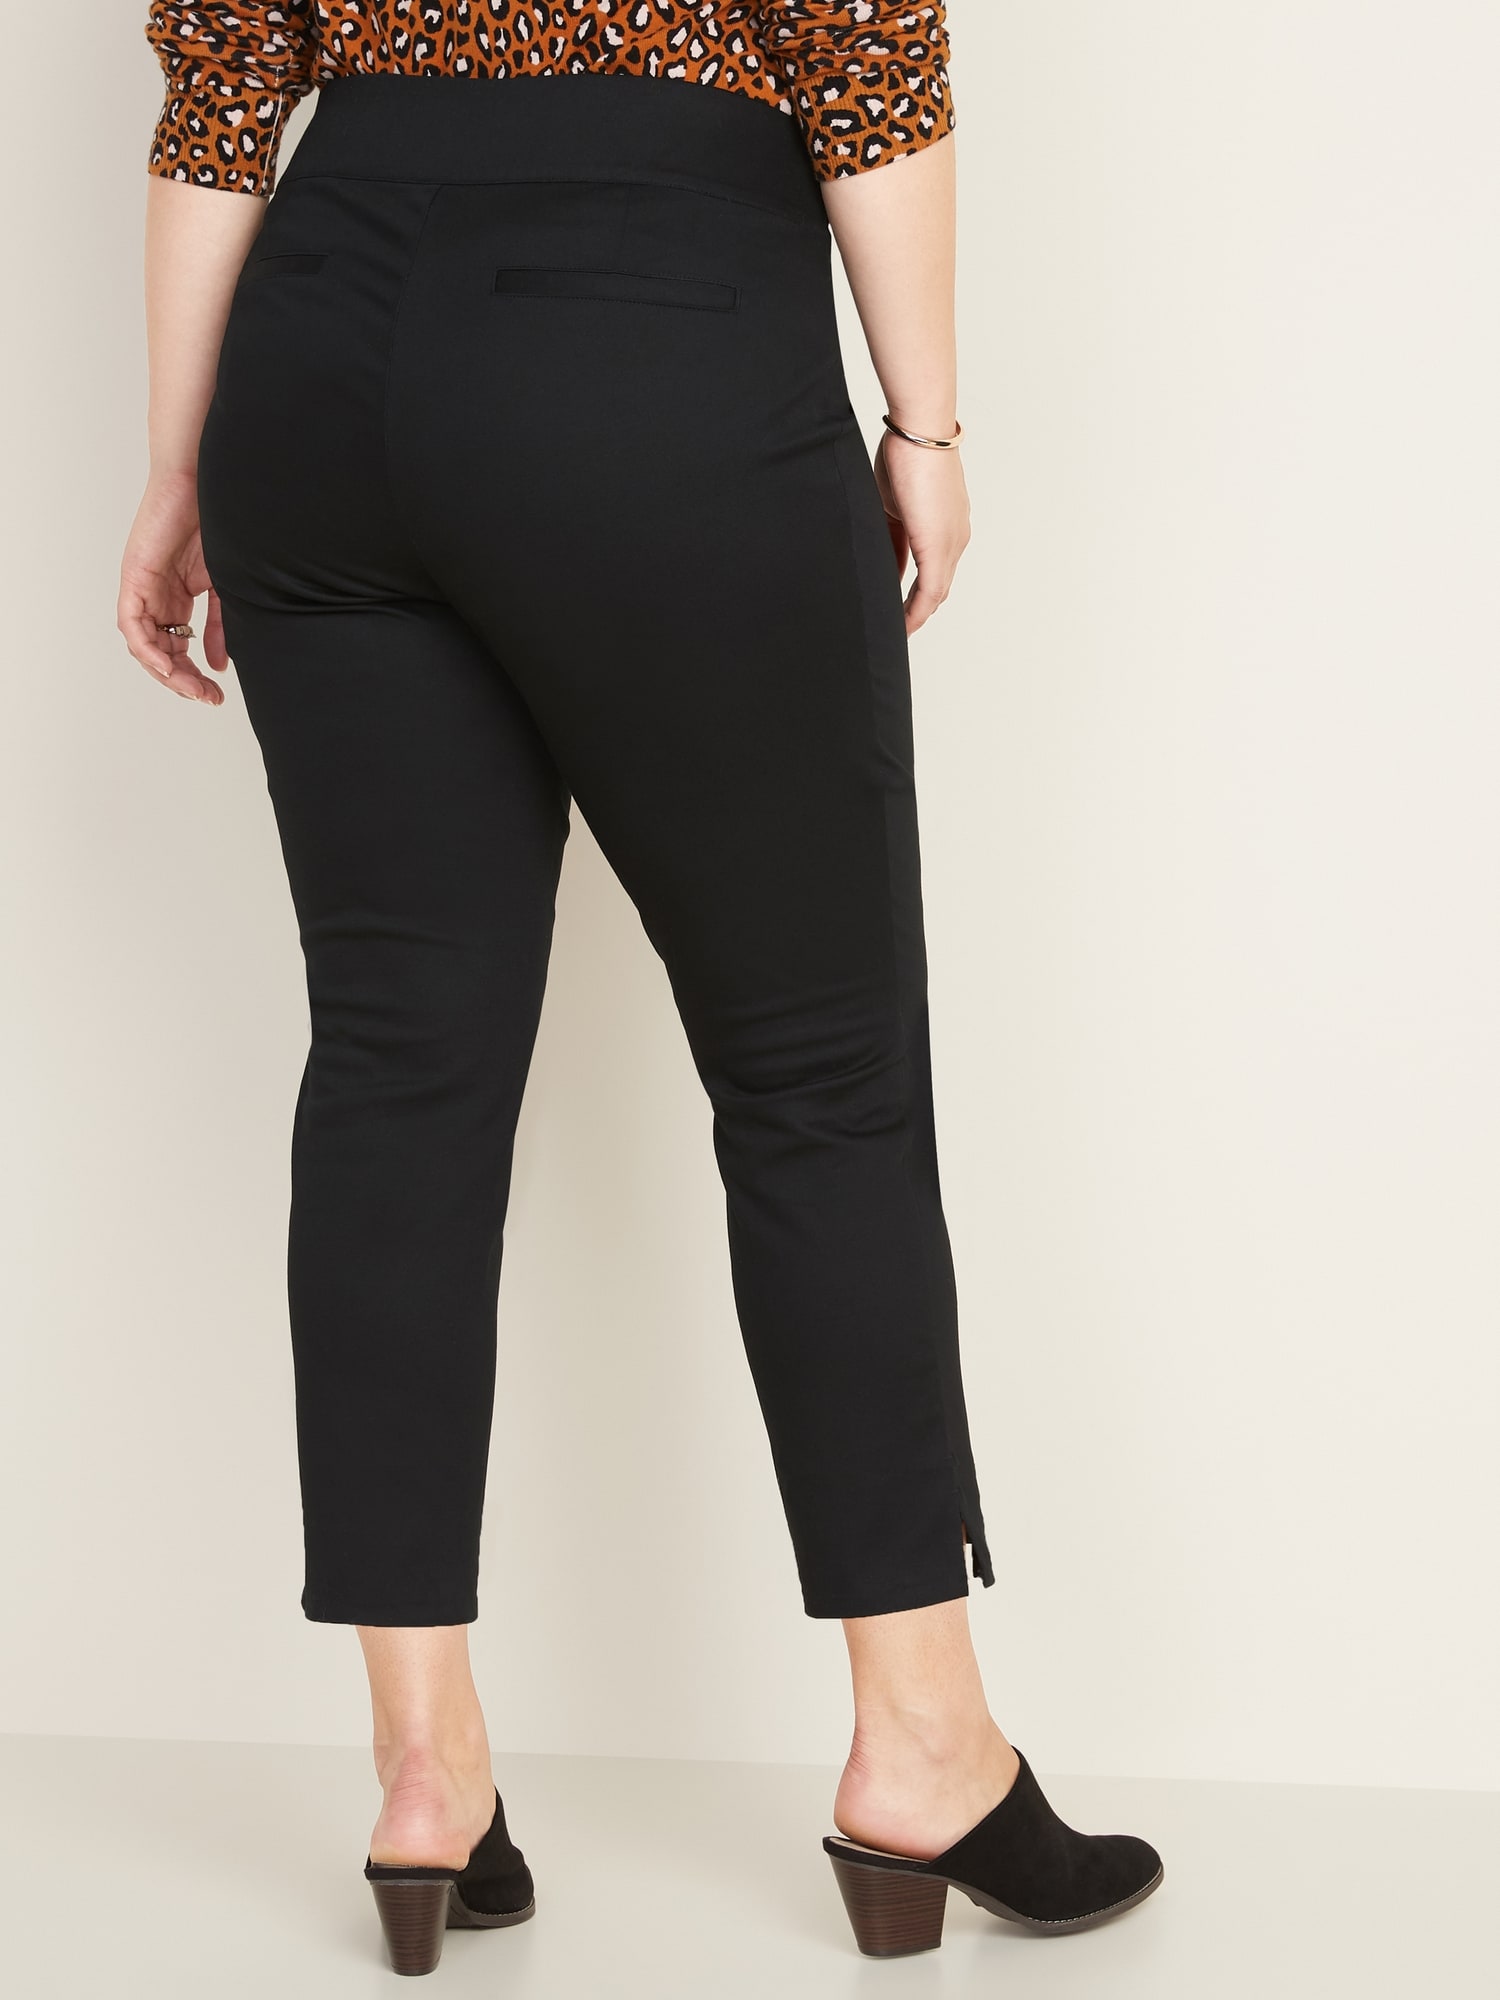 $20.25 - $23.22 Stylish Plus Size Pull-On Pants for Women